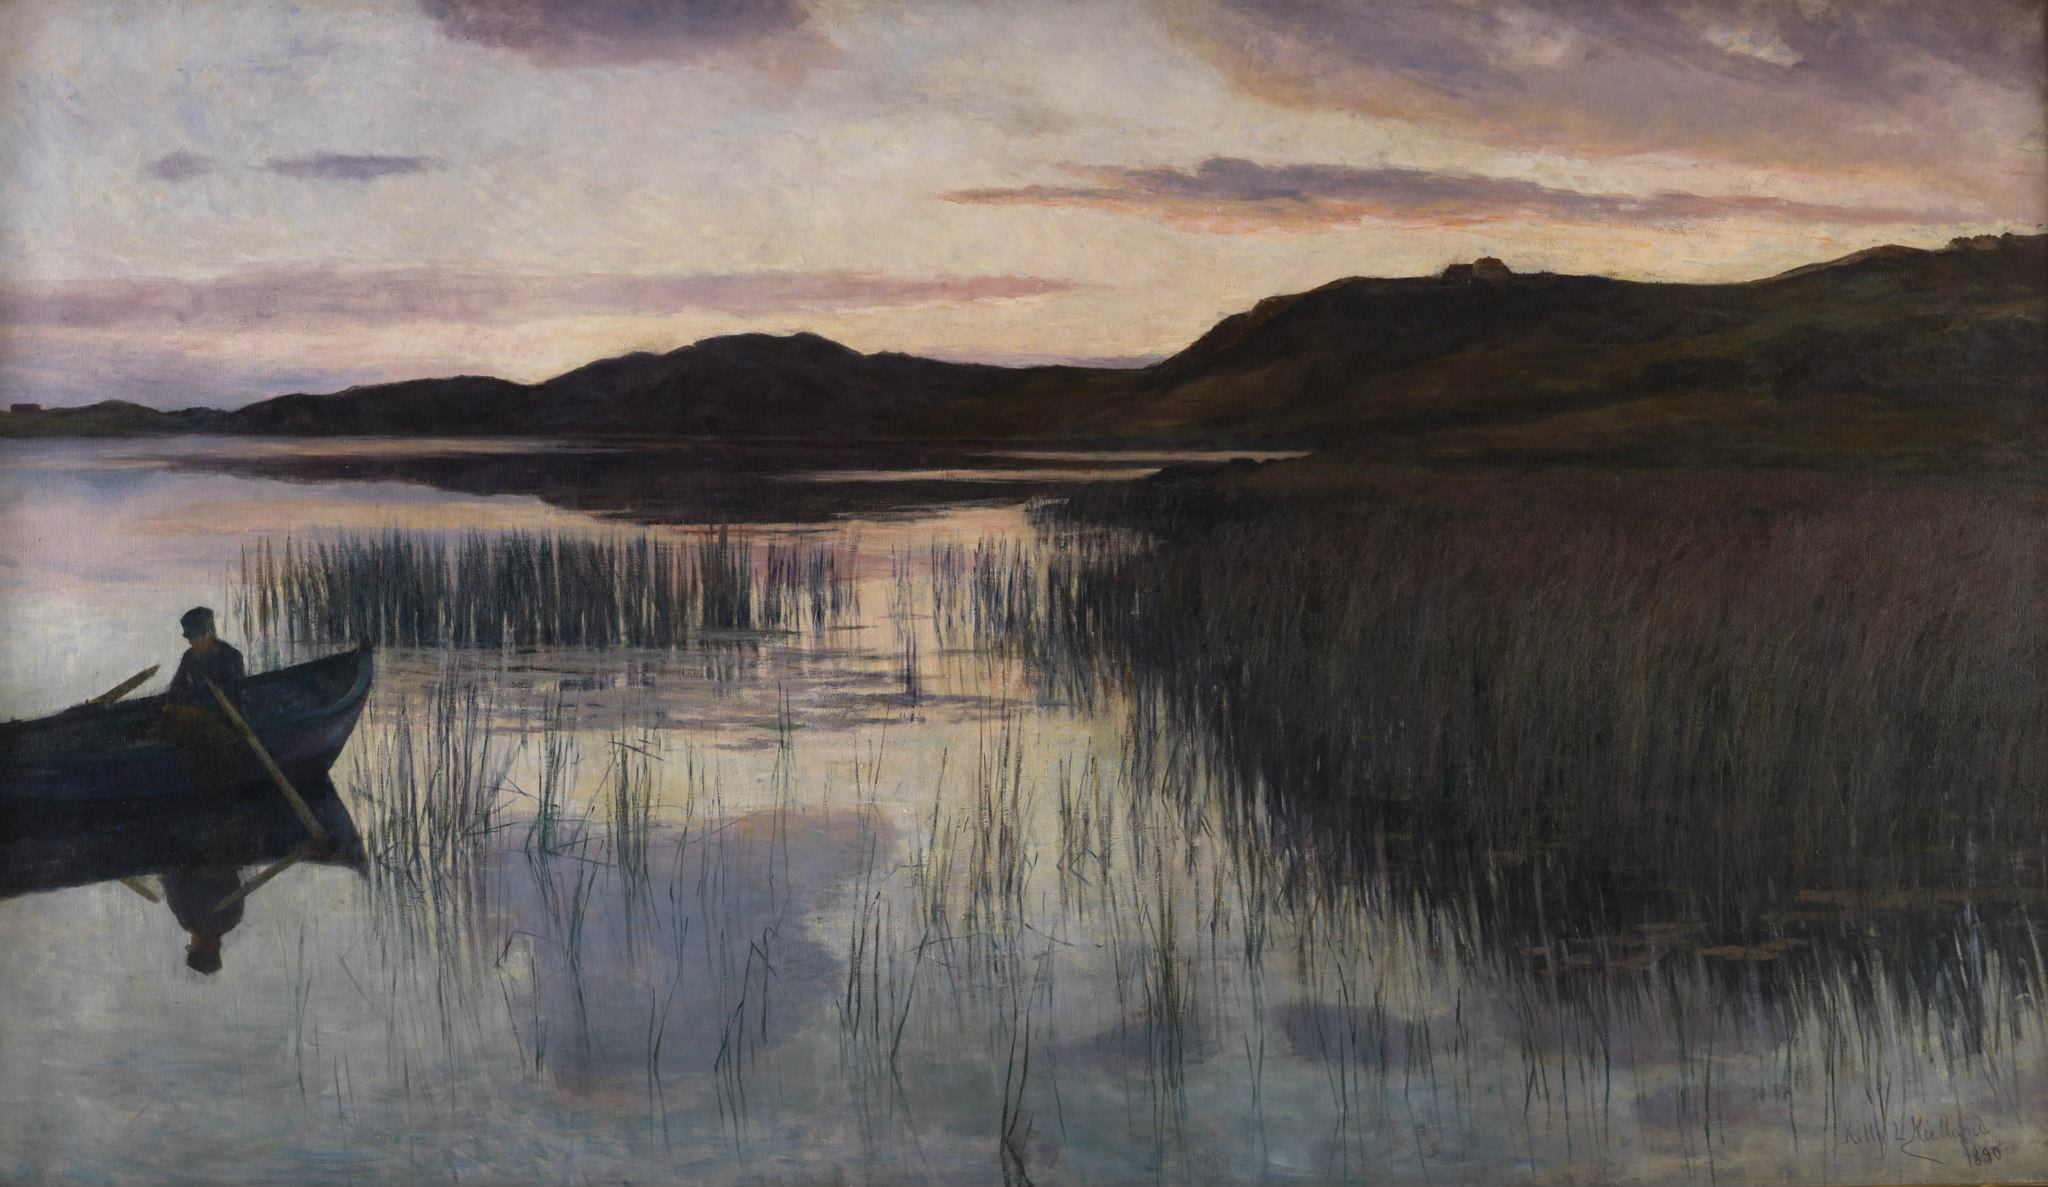 Evening Landscape at Stokkavatnet by Kitty Kielland - 1890 - 115 x 120 cm The Royal Collections